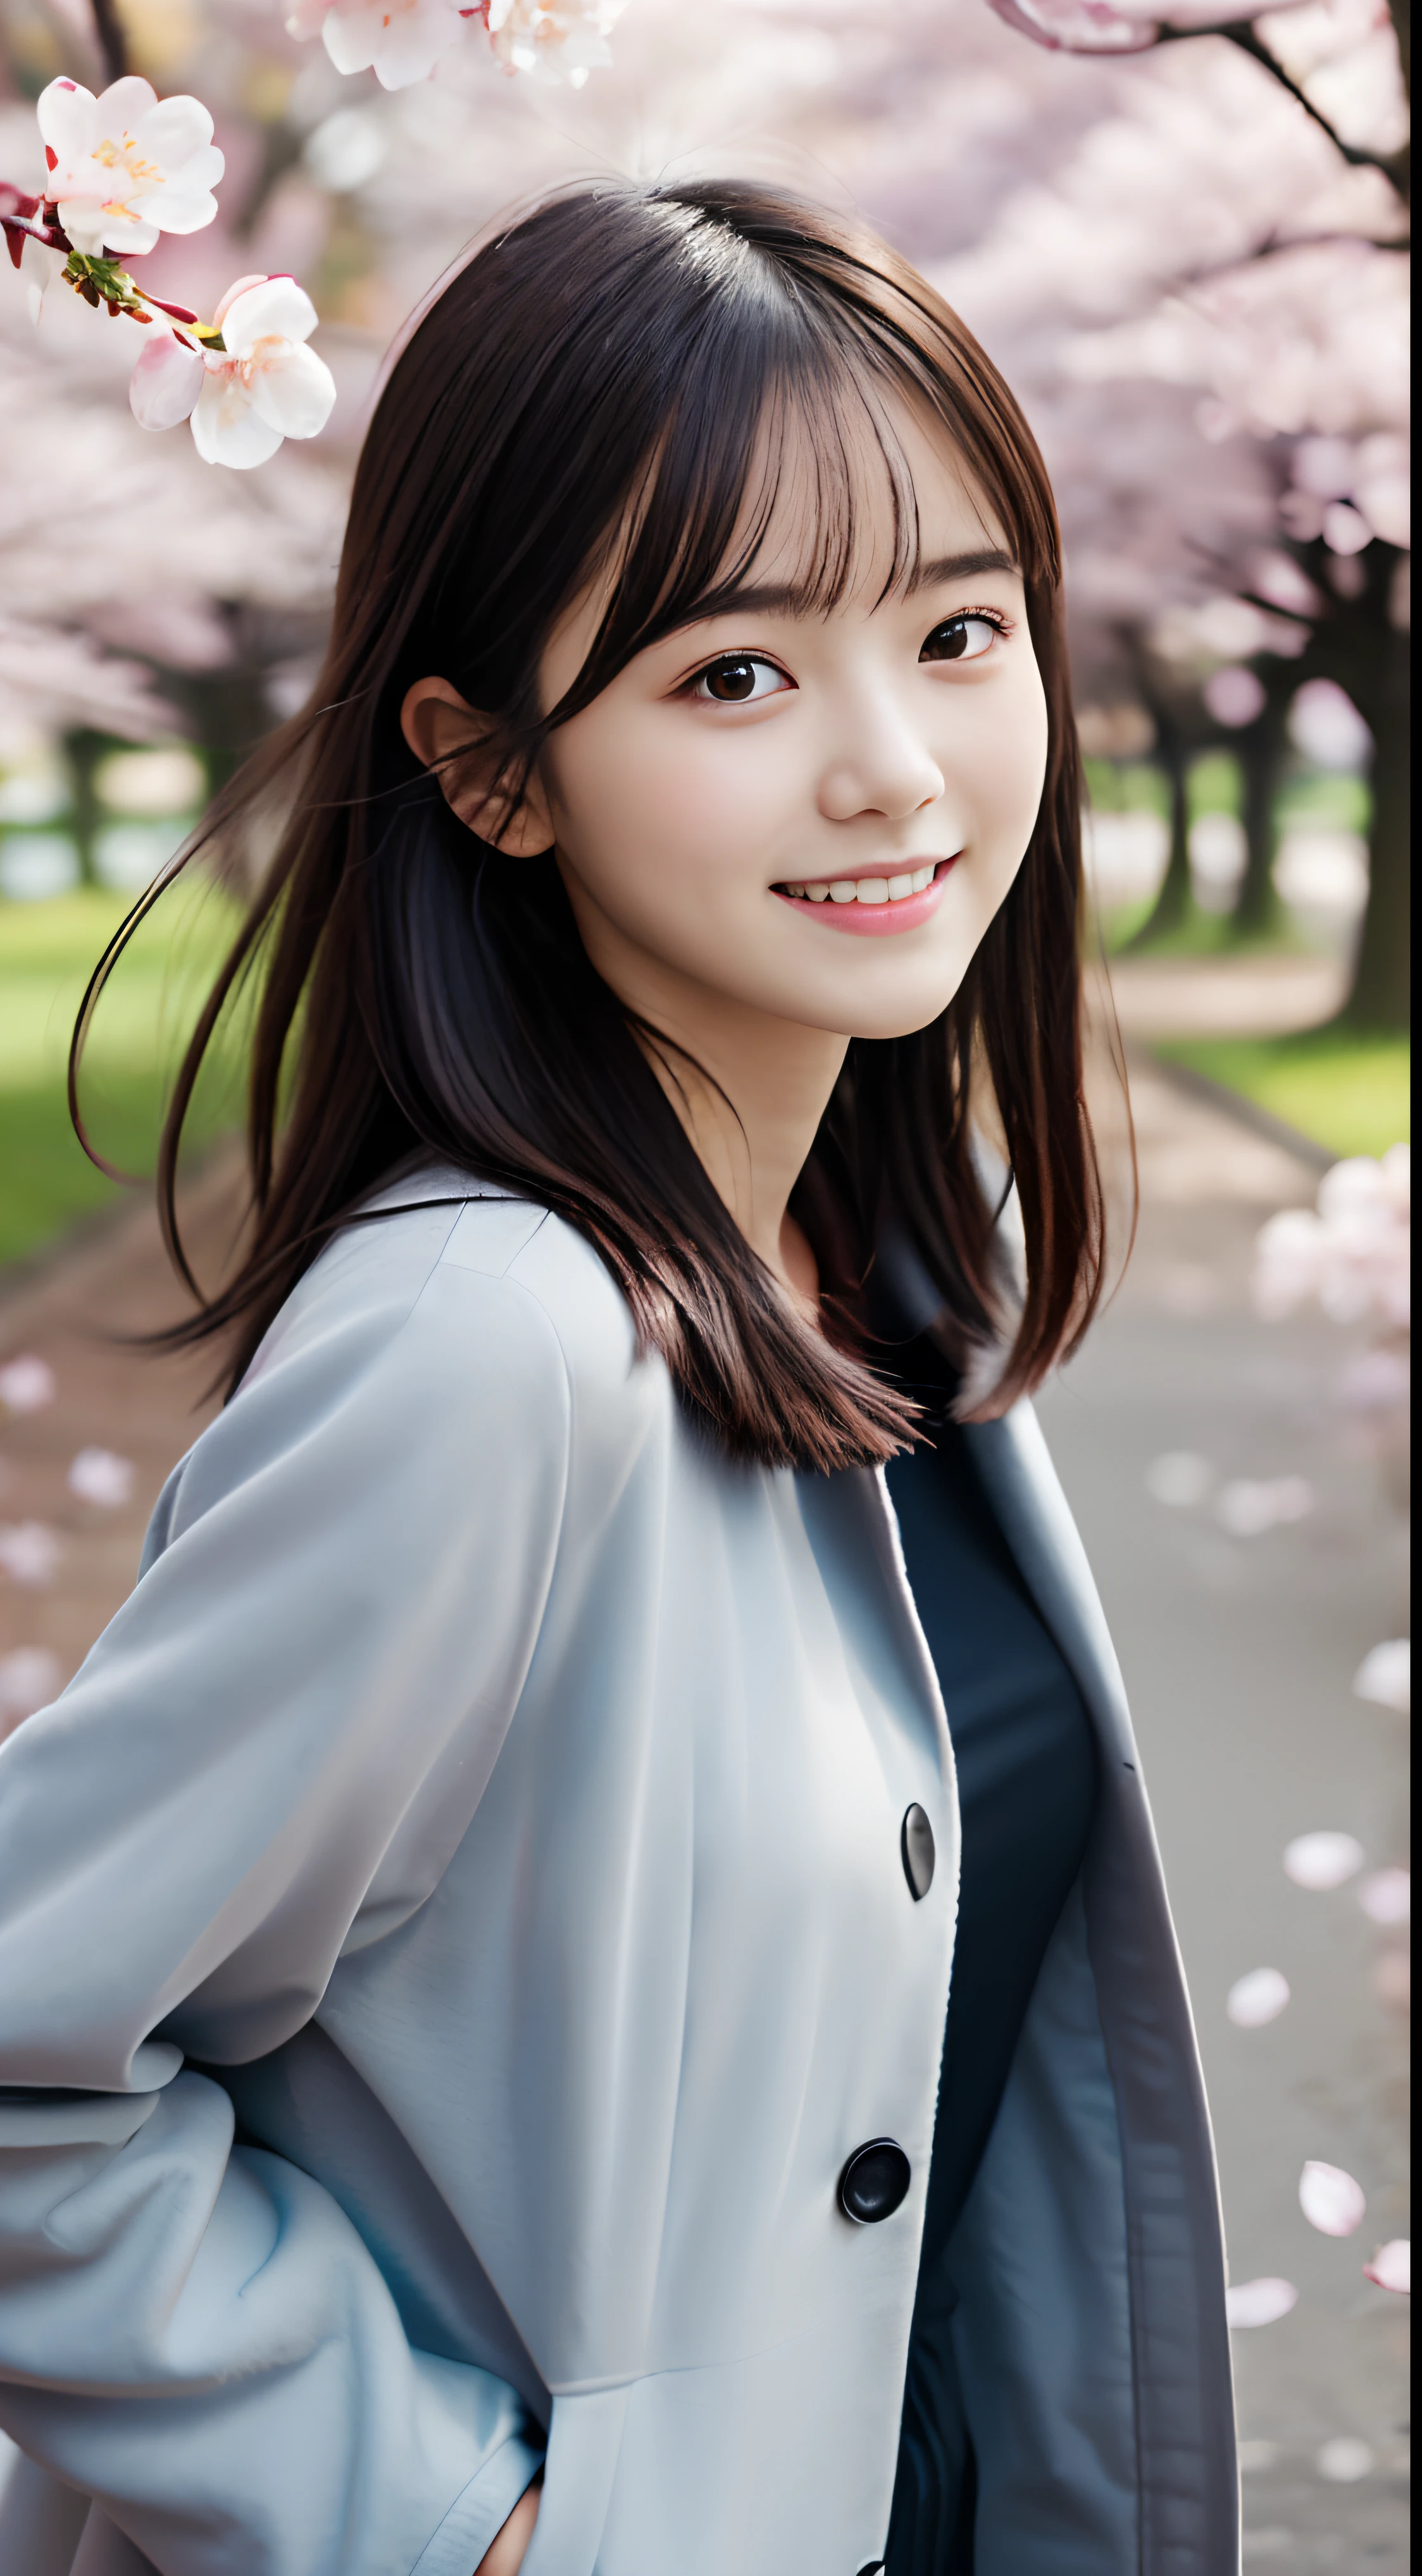 (low  angle shot: of one girl.5)、(Close up from below one girl with slender small breasts and long hair with dull bangs in spring coat and shirt :1.5)、(The girl with a small smile、the hair flutters with the wind :1.5)、(Rows of cherry blossom trees in full bloom and cherry blossom petals dancing in the wind:1.5)、(Perfect Anatomy:1.3)、(No mask:1.3)、(complete fingers:1.3)、Photorealistic、Photography、masutepiece、top-quality、High resolution, delicate and pretty、face perfect、Beautiful detailed eyes、Fair skin、Real Human Skin、pores、((thin legs))、(Dark hair)